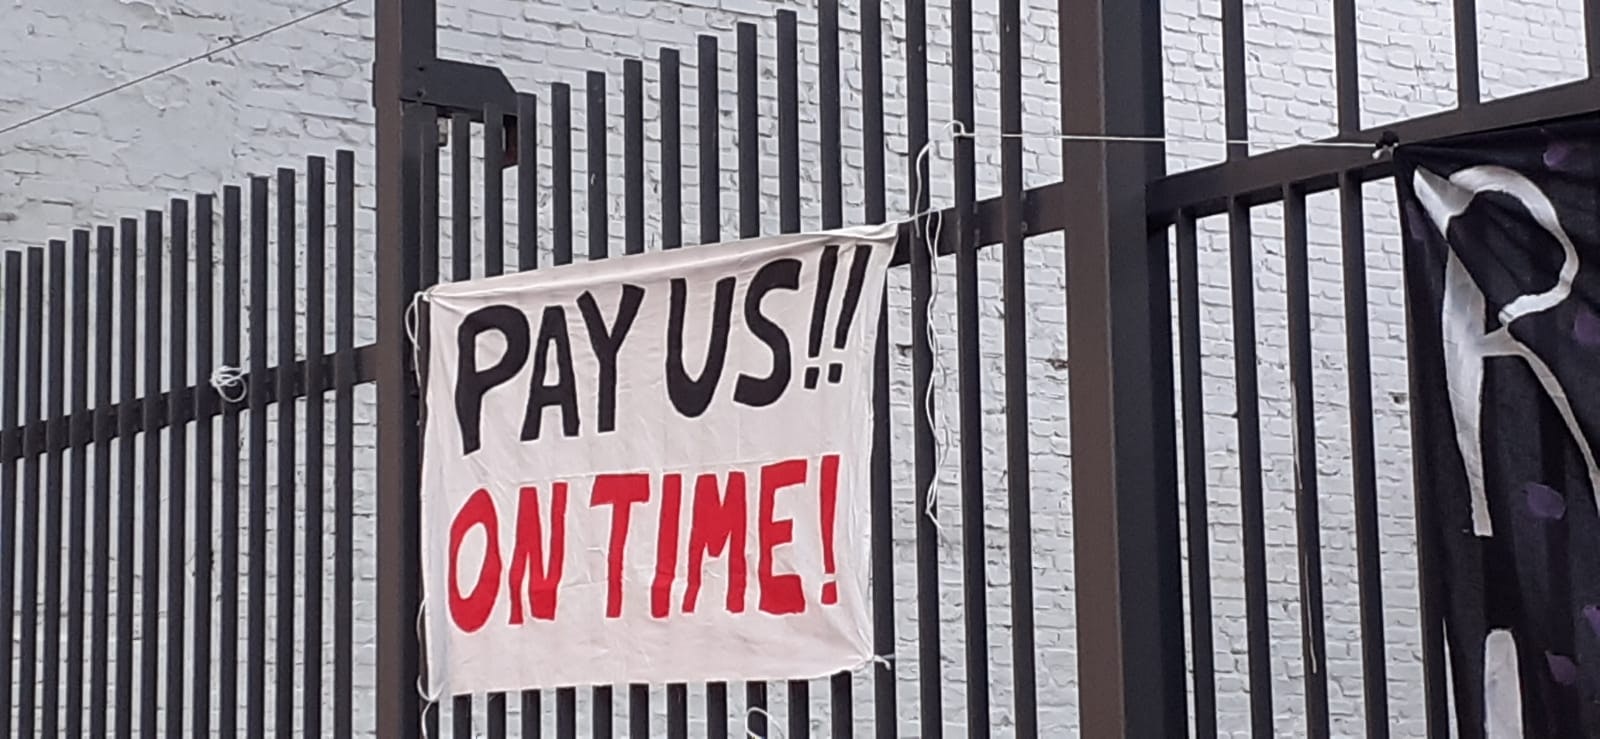 A banner from a Street Fleet protest in Berlins that reads &quot;Pay us!! On Time!&quot;